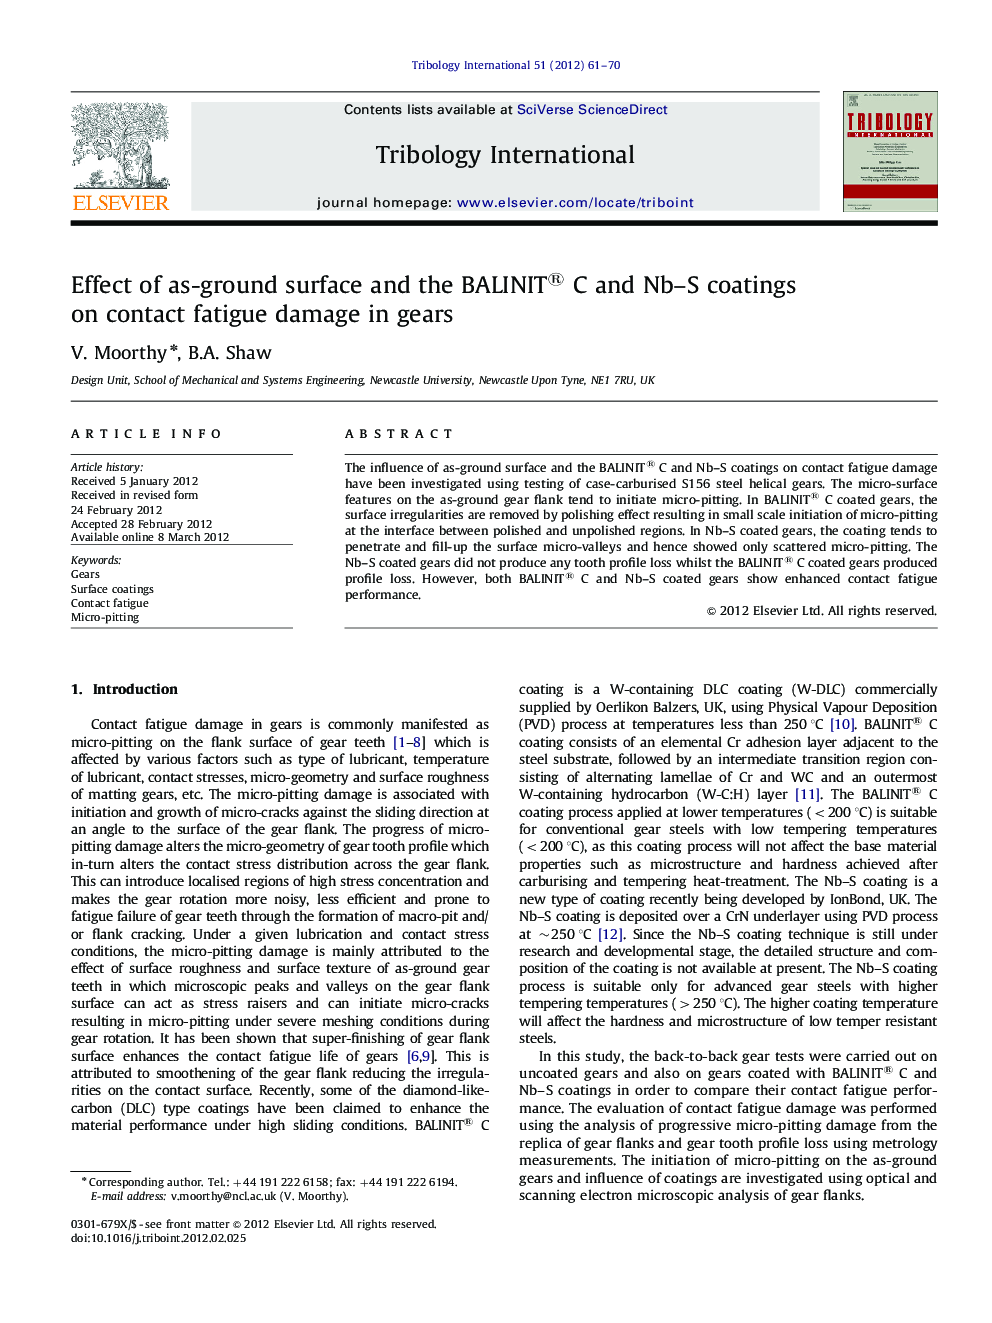 Effect of as-ground surface and the BALINIT® C and Nb-S coatings on contact fatigue damage in gears